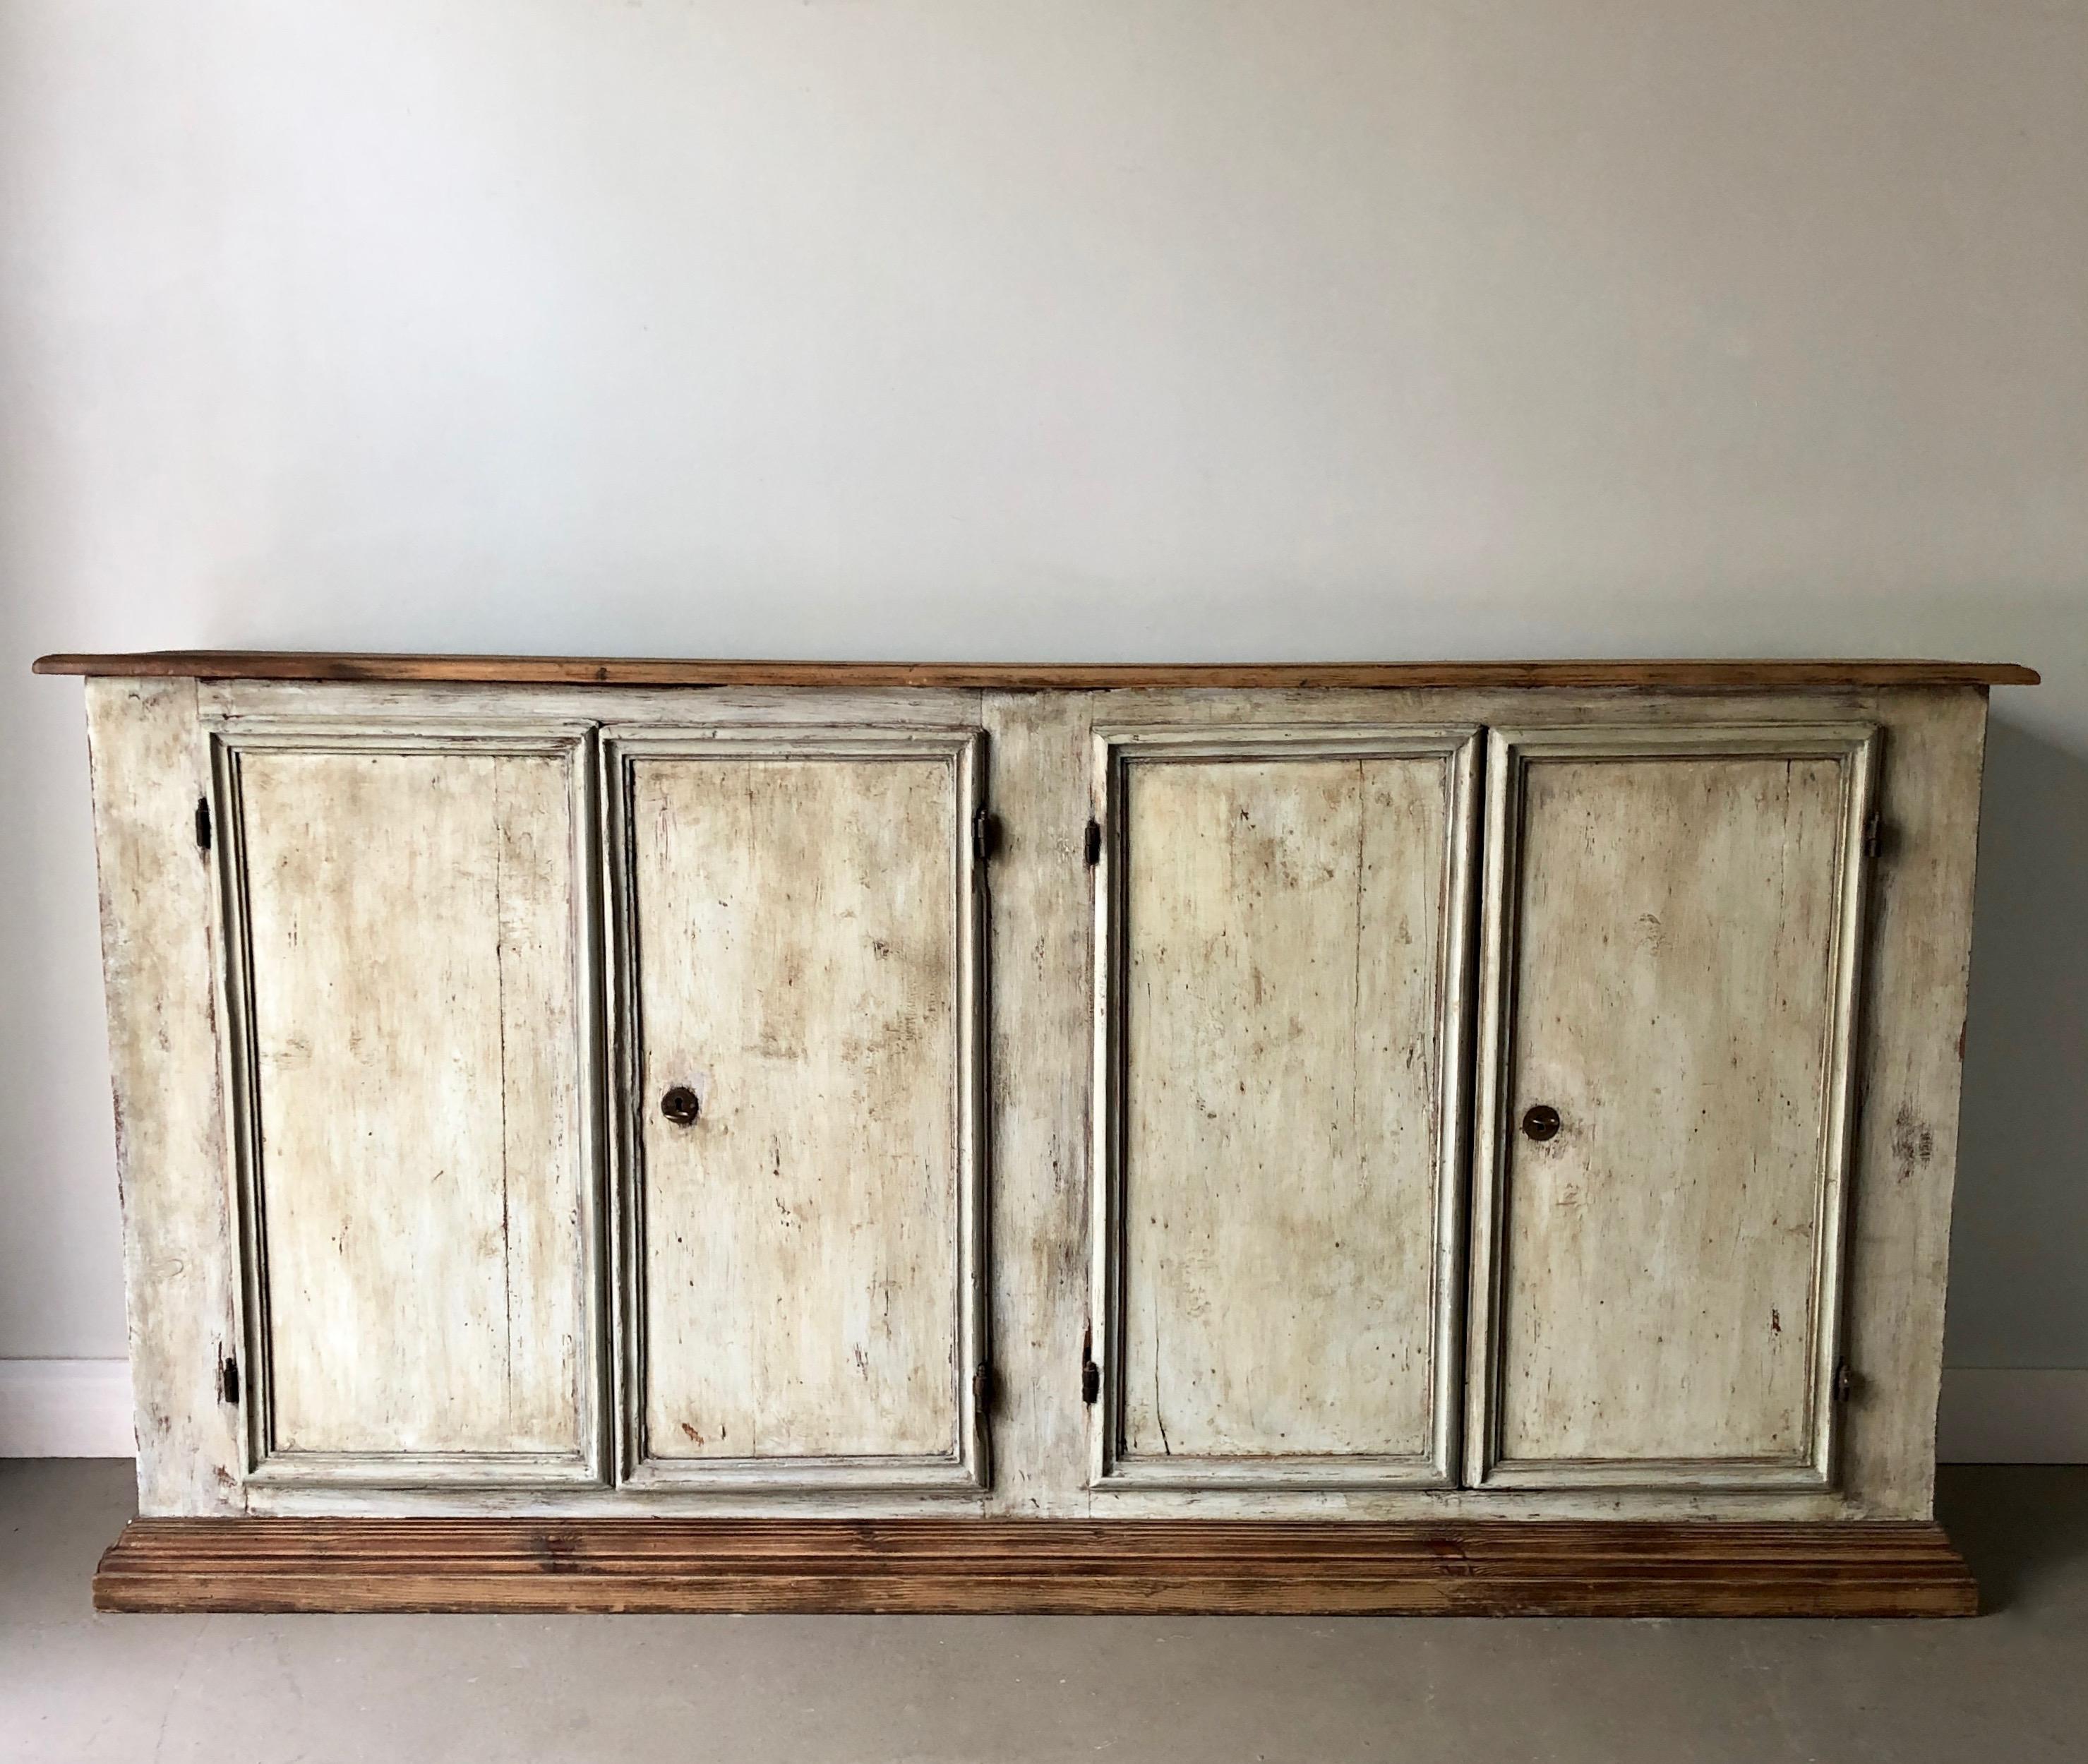 A large Italian painted sideboard with four paneled dubble doors, natural patinated wooden top and base. Original iron hinges.
Old aged broken locks replaced with keys.